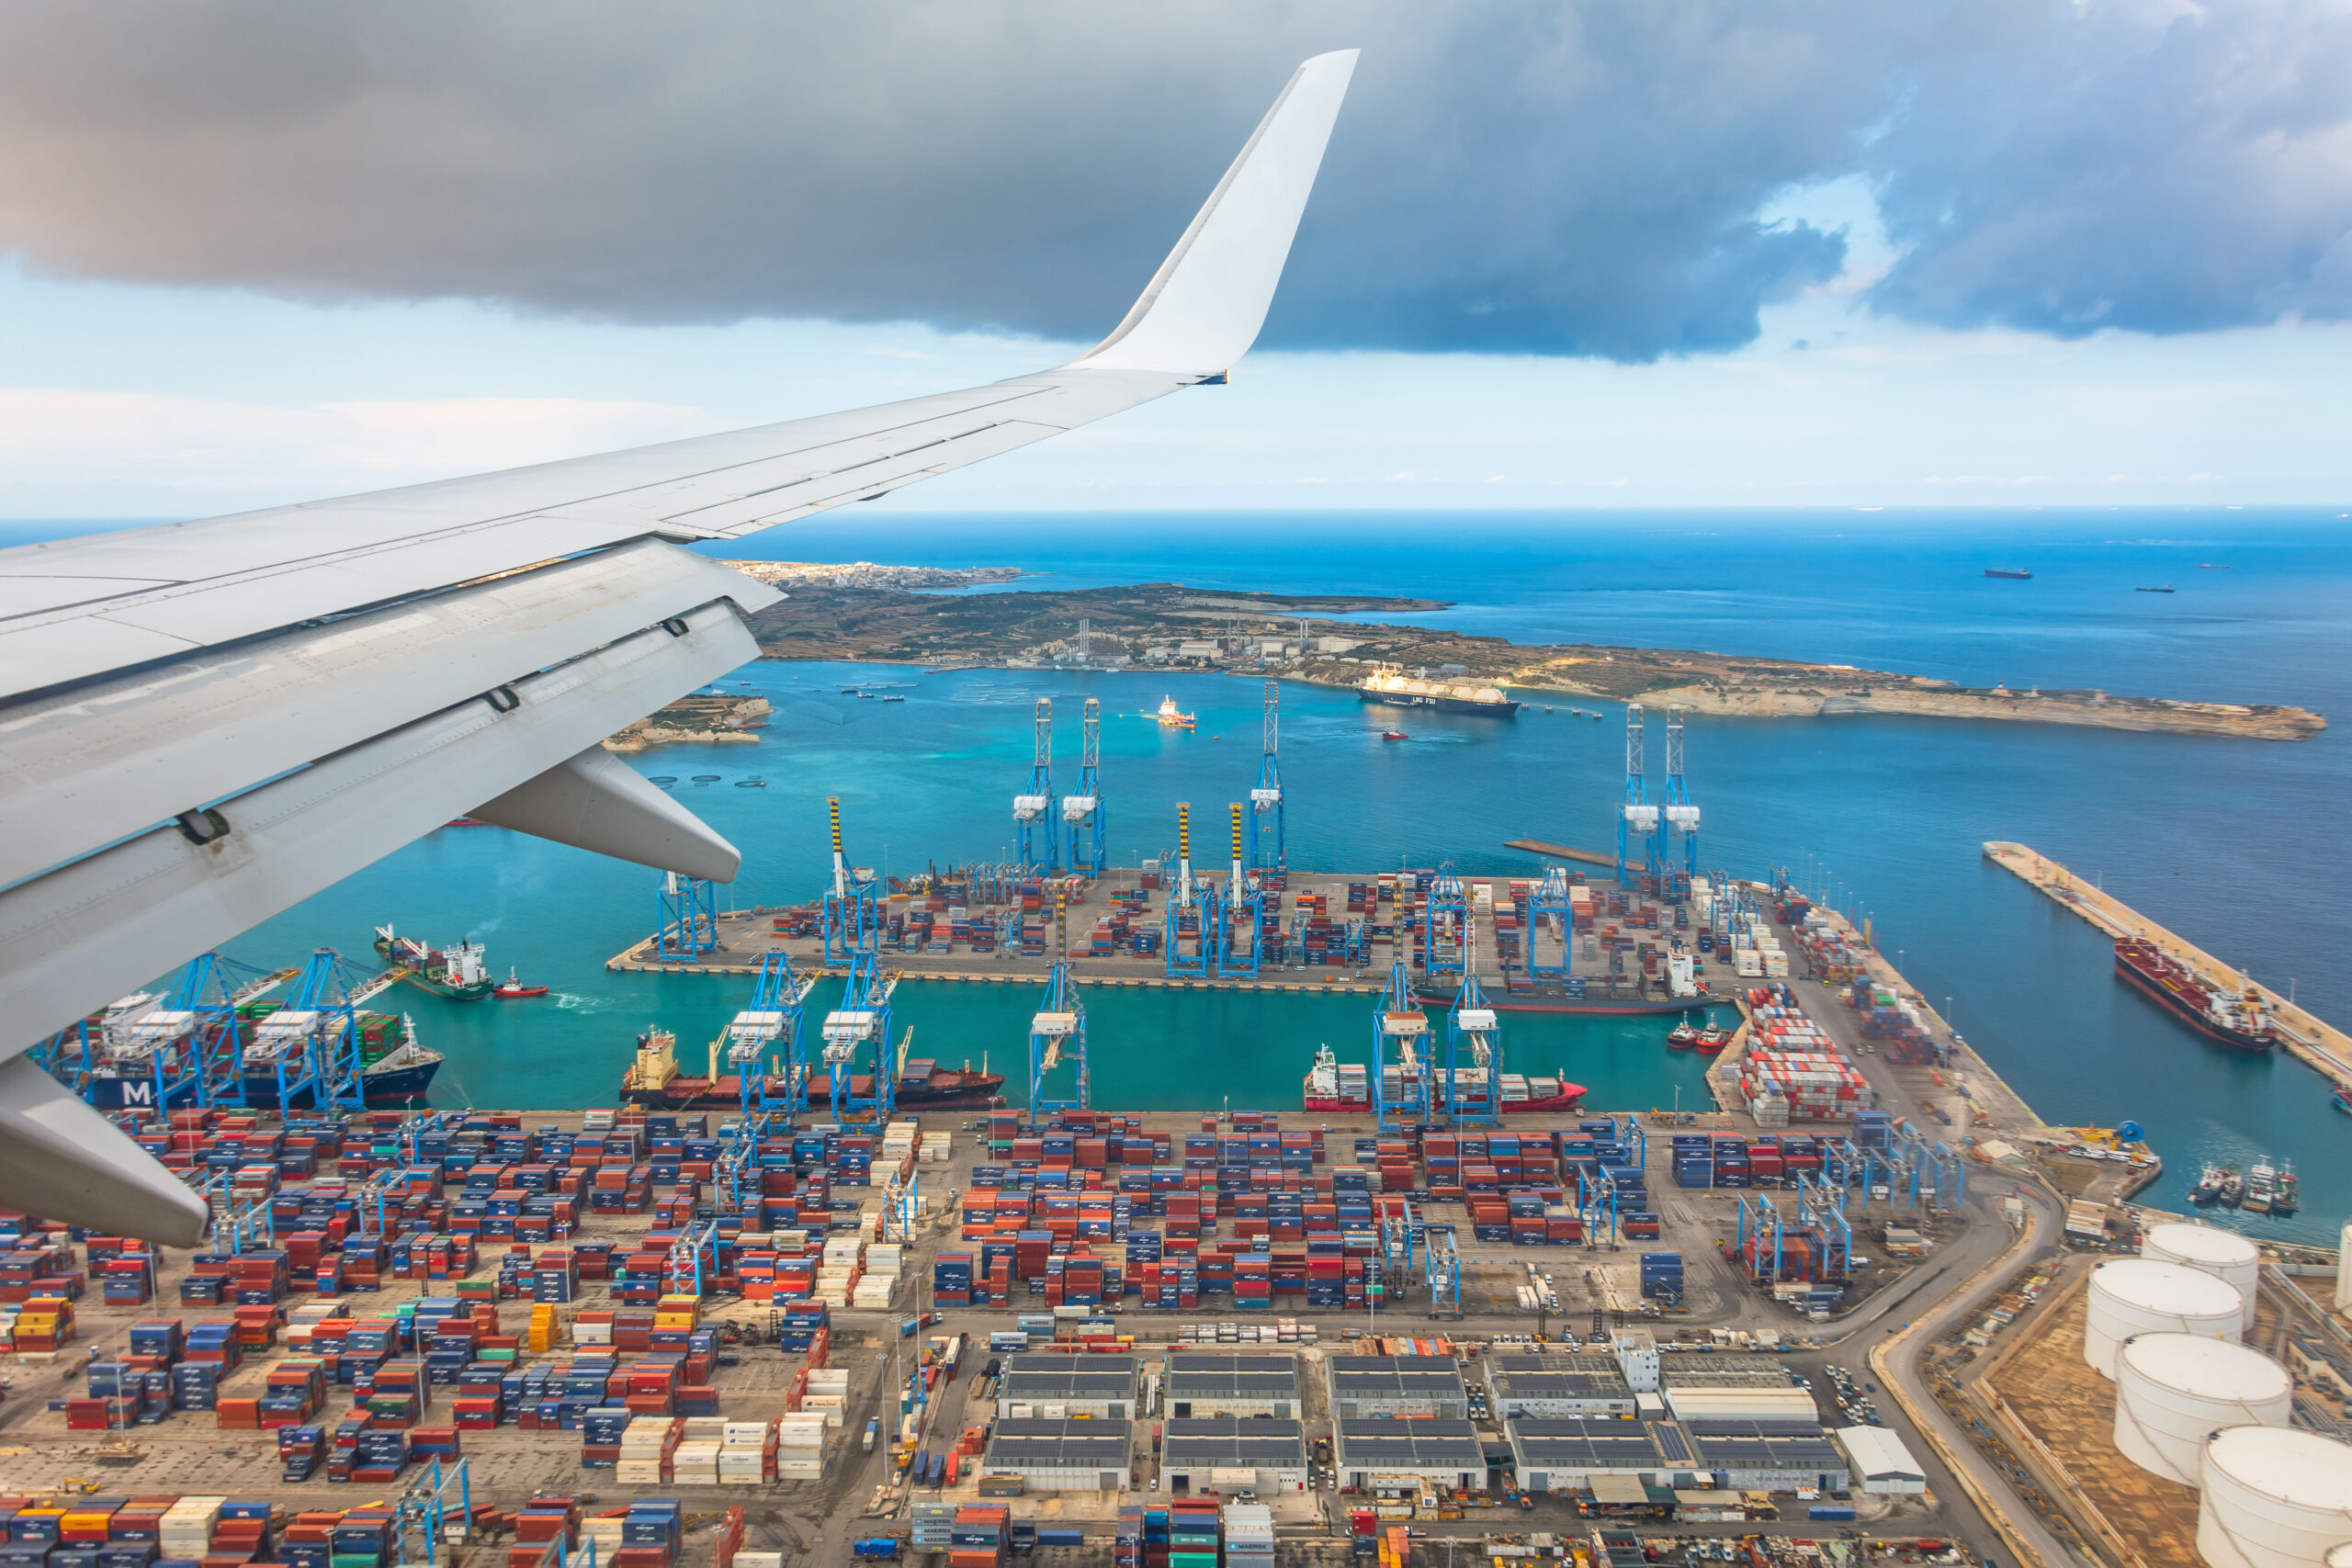 The port transporting containers. Wing view of Marsaxlokk, Malta